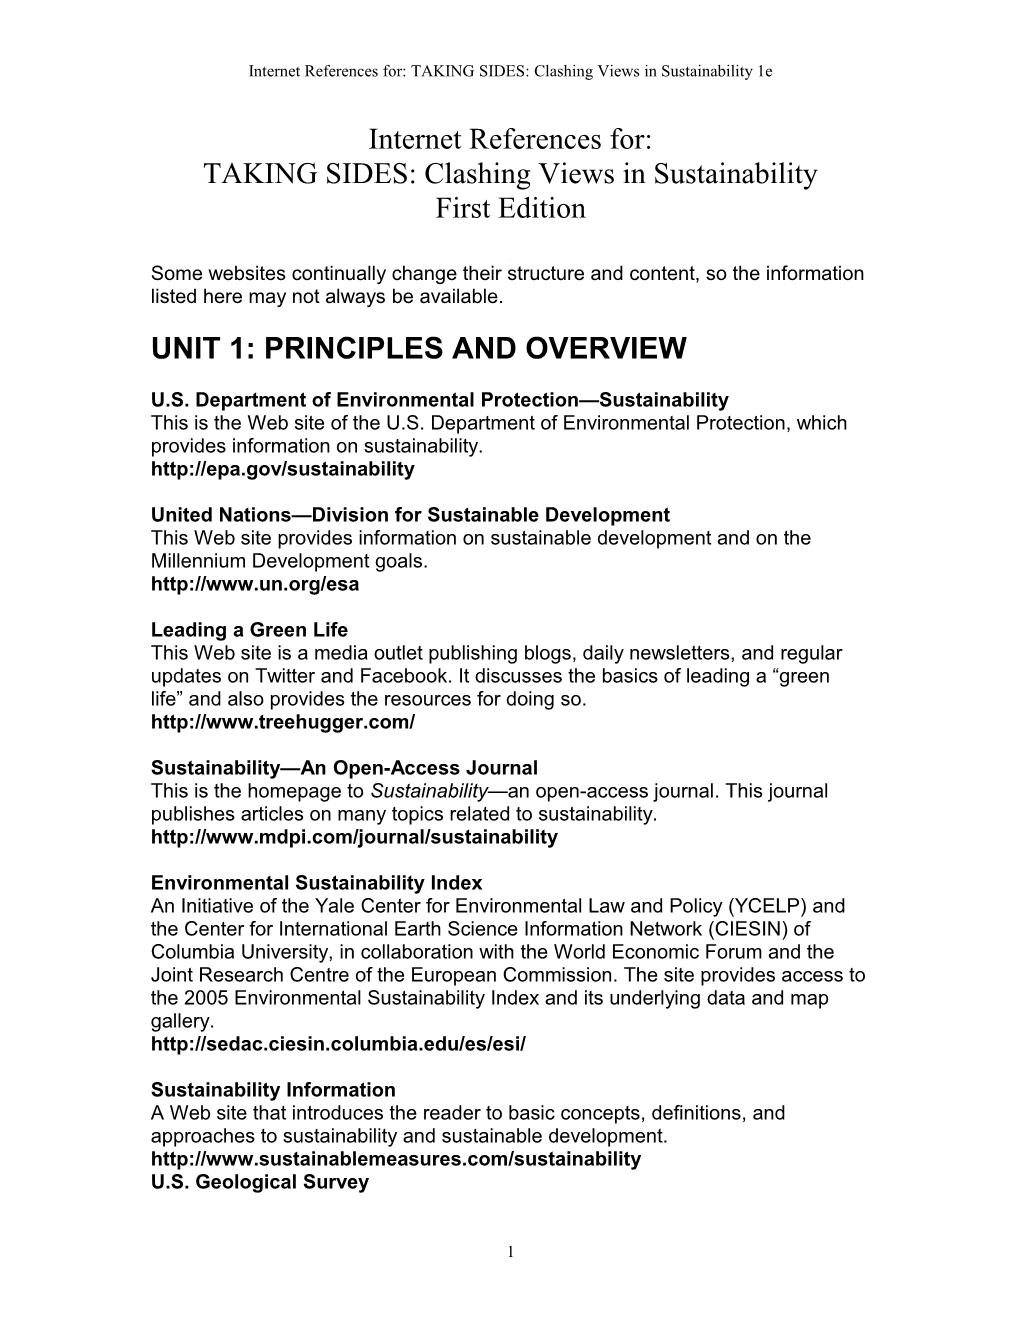 Internet References For: TAKING SIDES: Clashing Views in Sustainability 1E